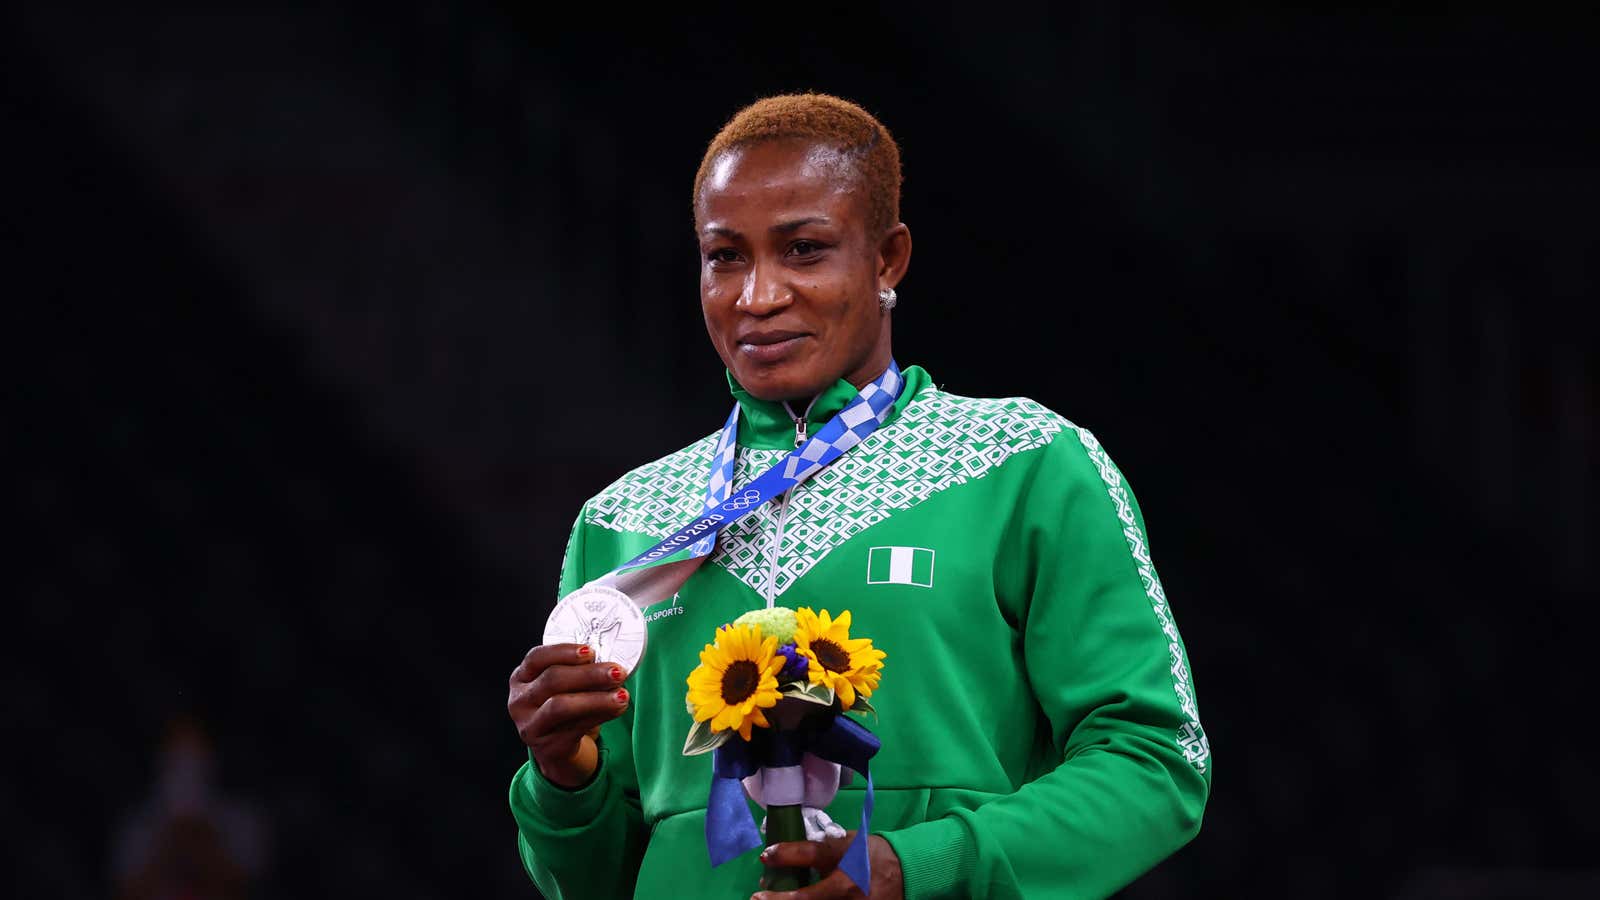 Silver medalist Blessing Oborududu of Nigeria poses with her medal